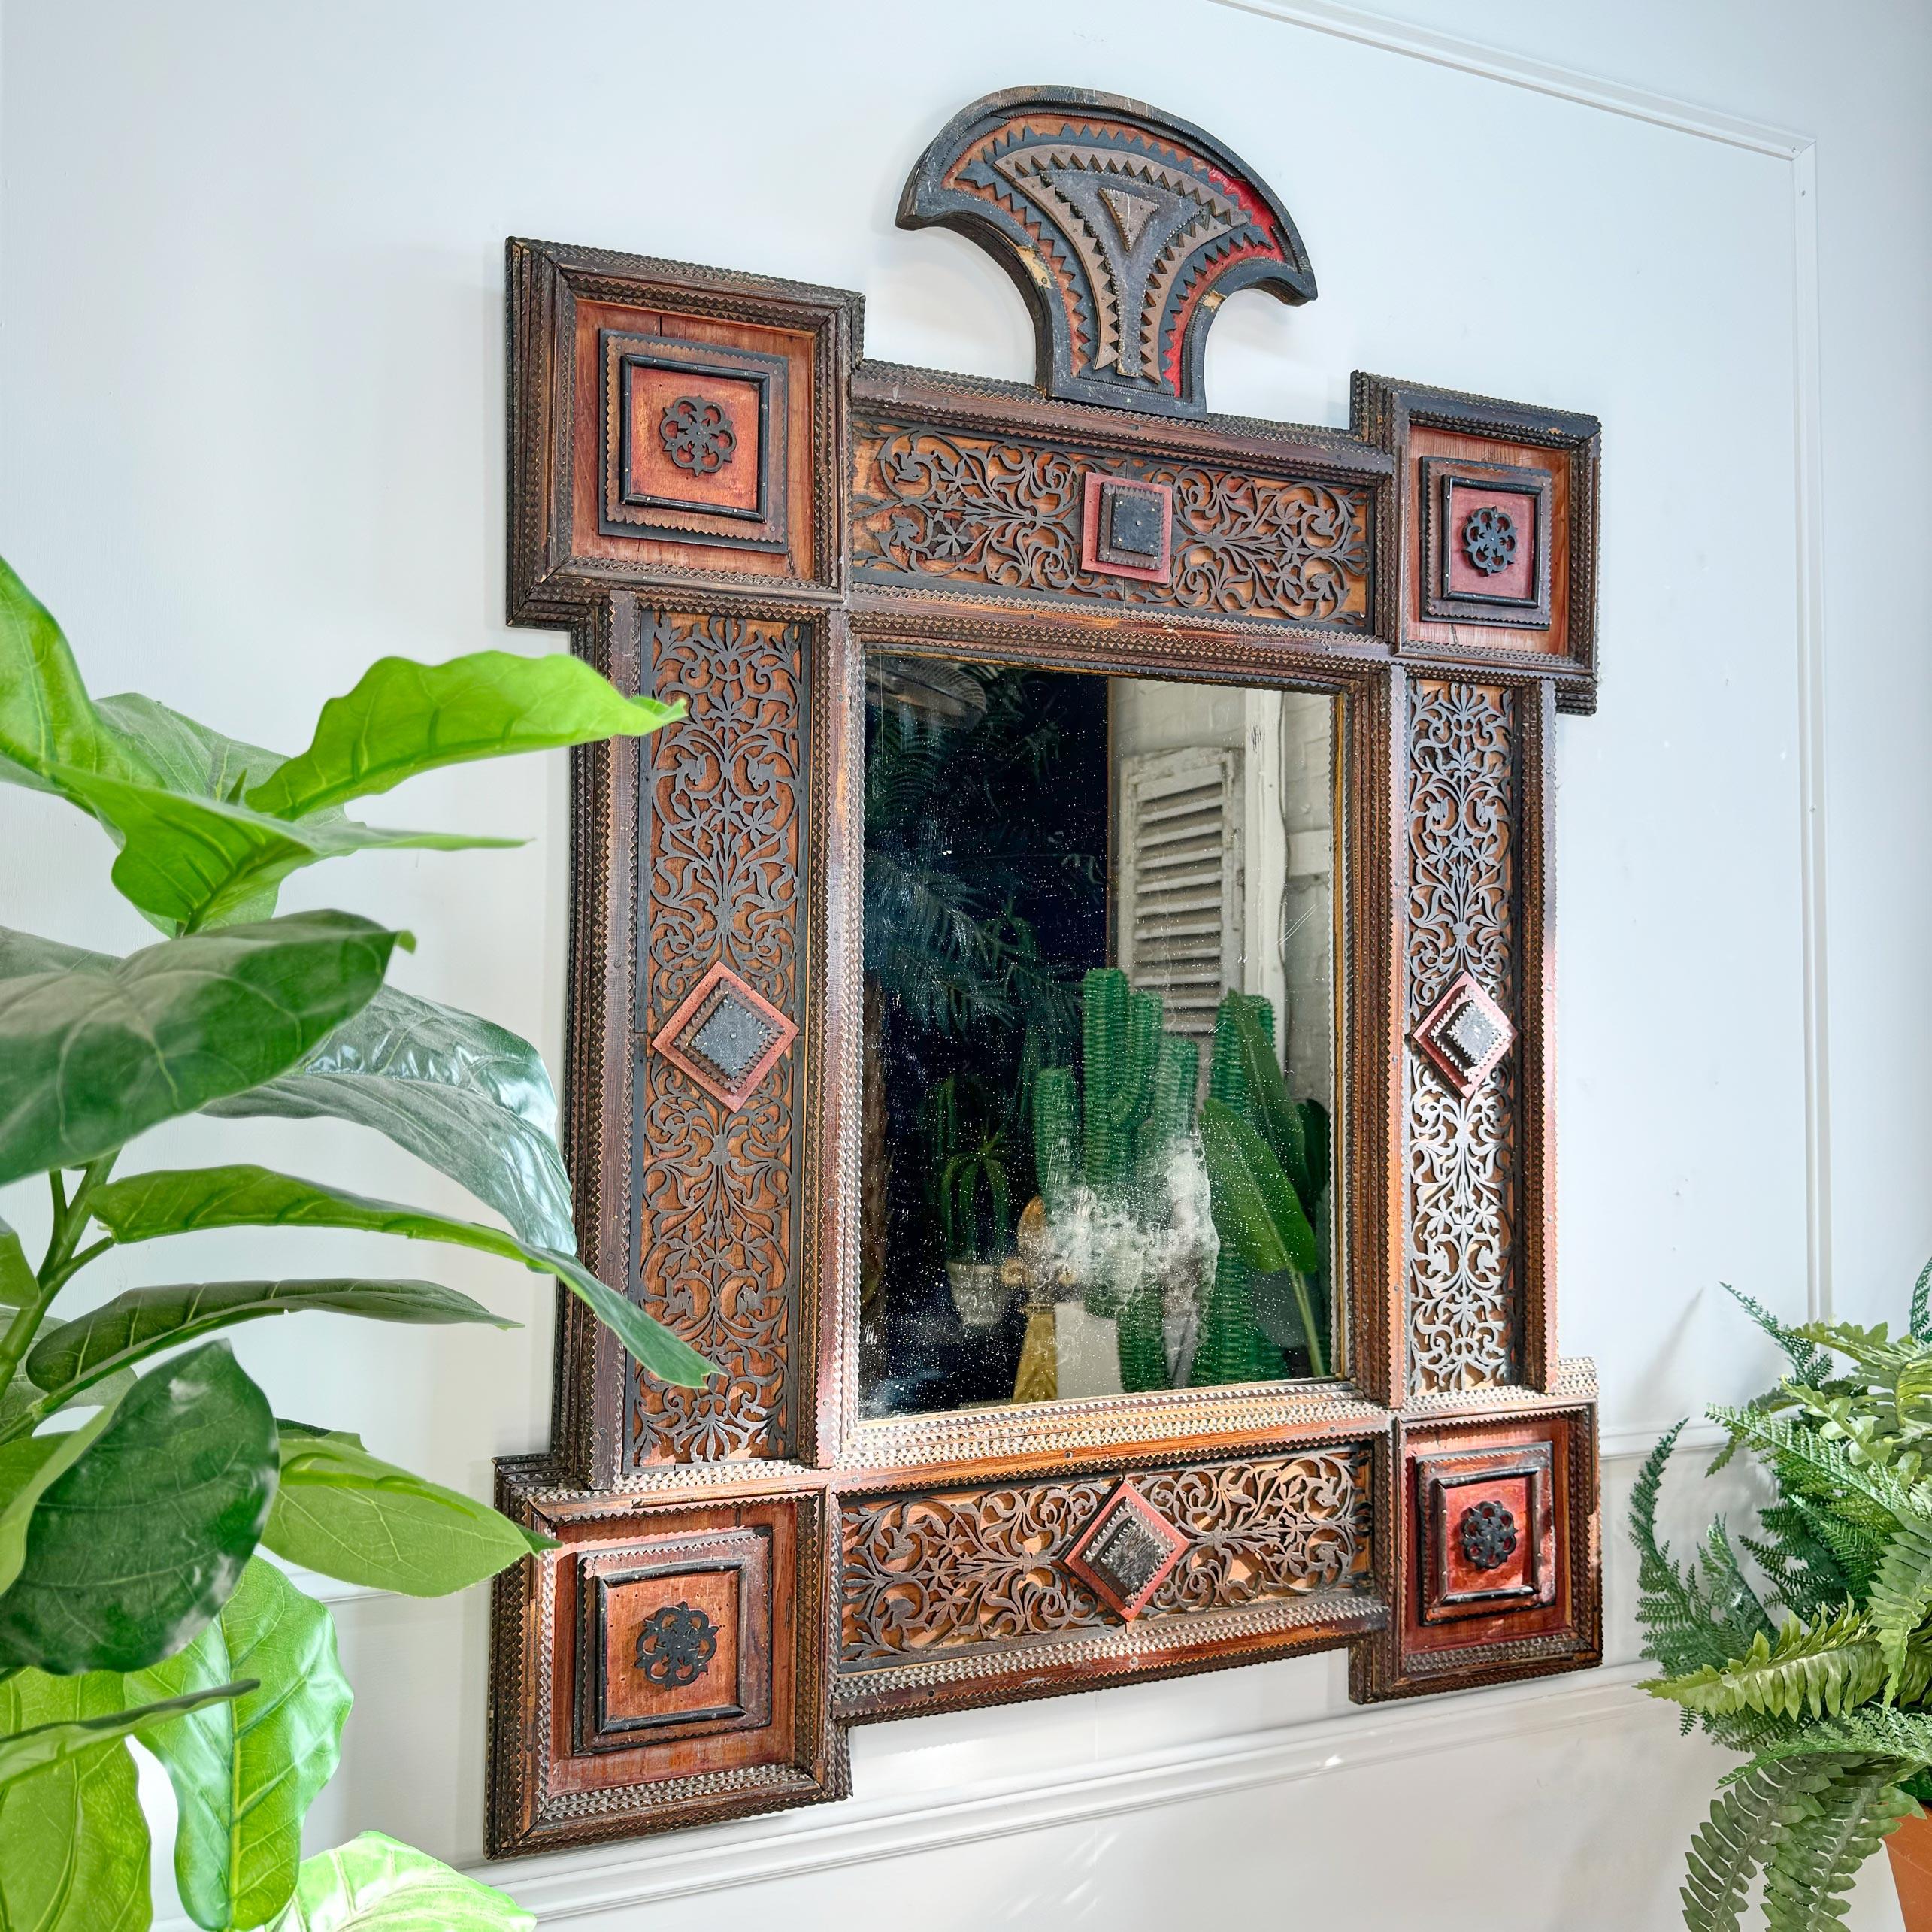 An incredibly rare and decorative mid-19th century German Tramp Art mirror, adorned with removable crest and stunning fretwork detailing throughout. This is an important example of Northern European Tramp / Folk Art, Dating to circa 1870.



it is